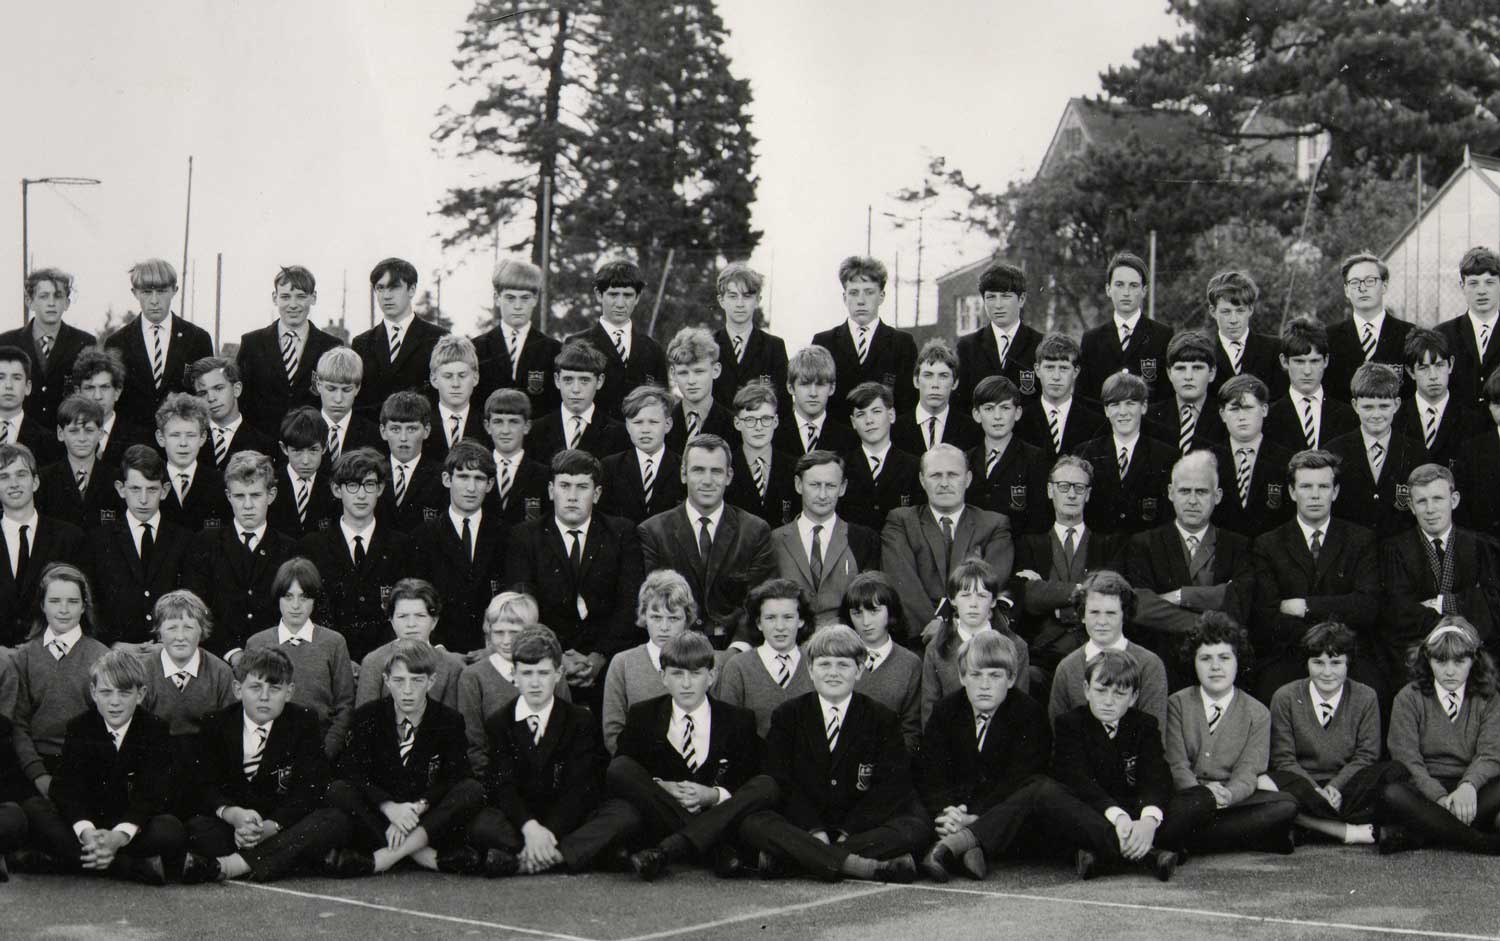 A photo of section1 of the Bells Grammar School photo from 1966 - section 2